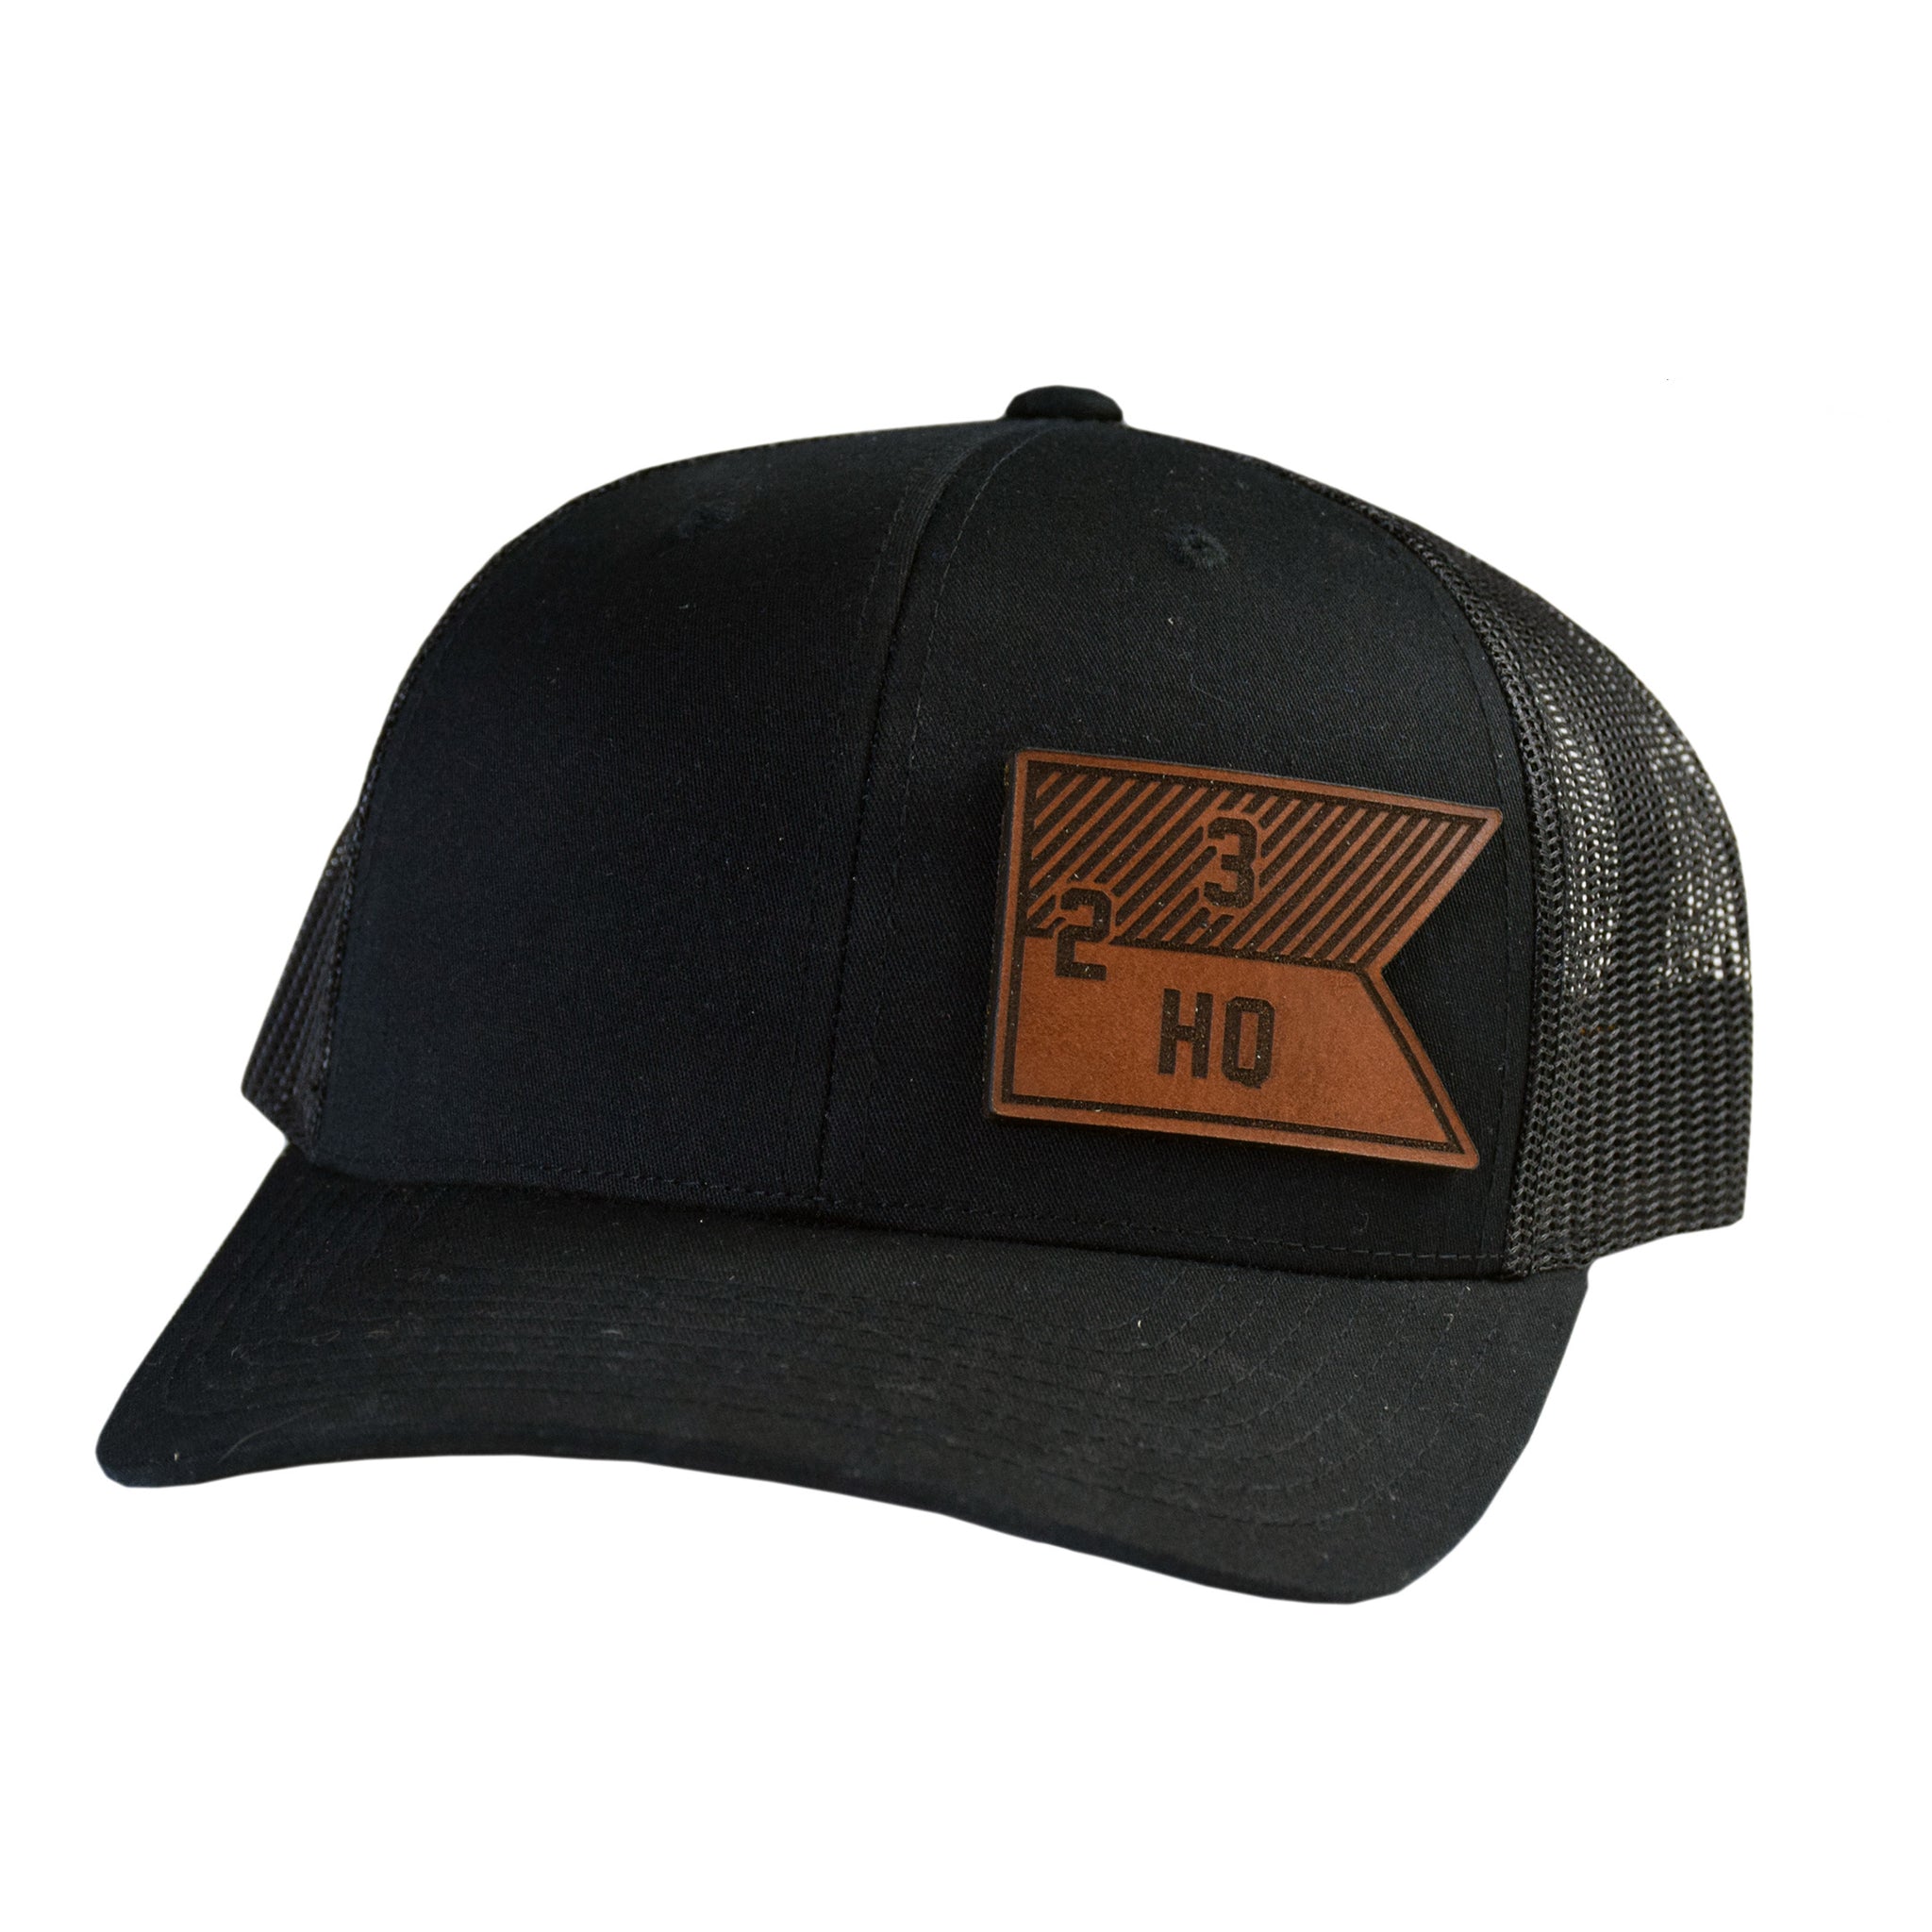 Leather Pullers - Rattler Guidon Troop Trigger American Snapback